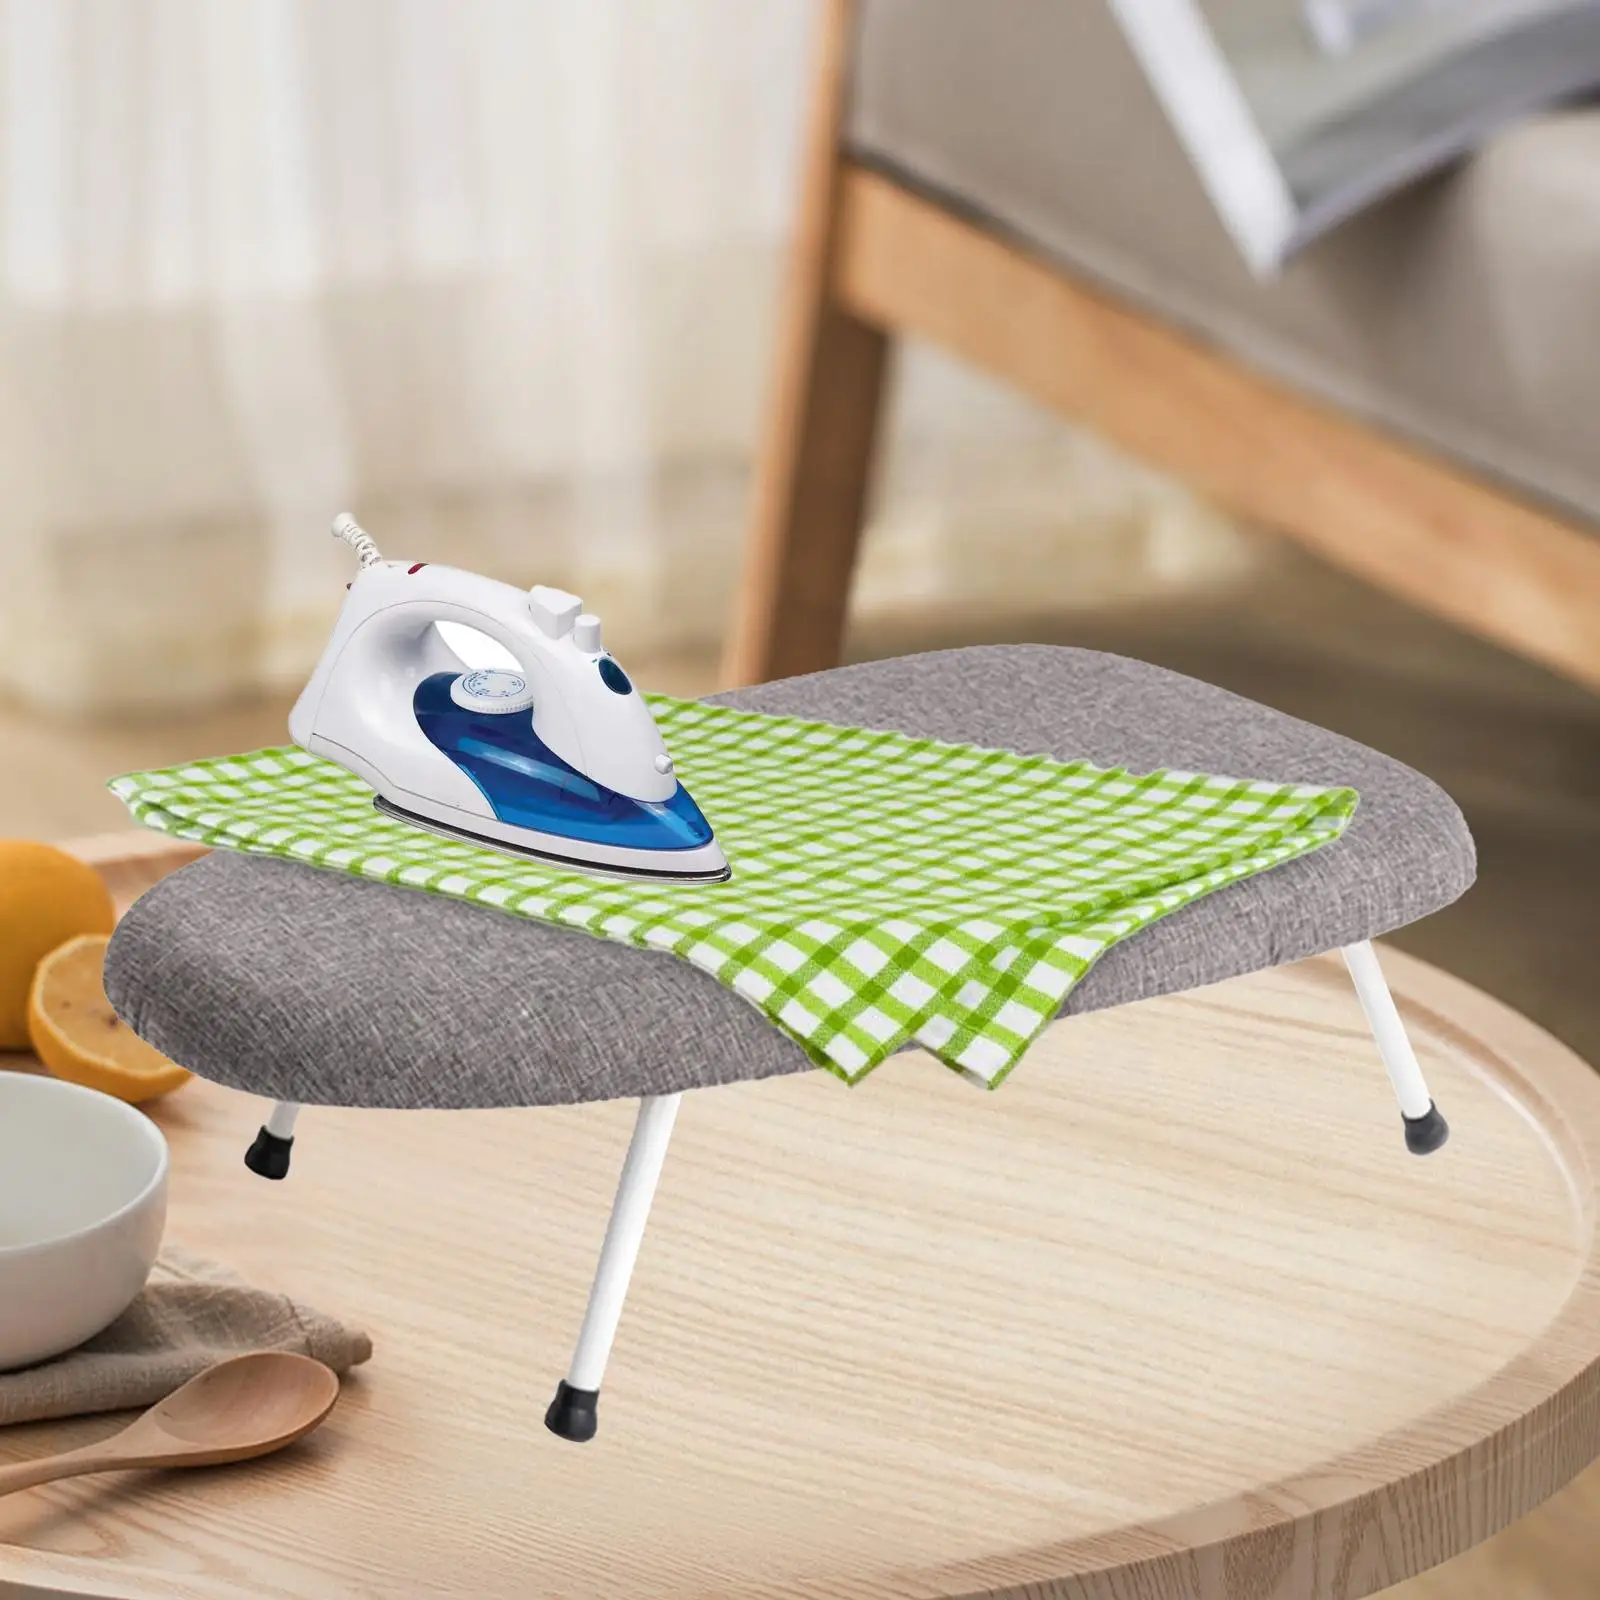 Tabletop Ironing Board Ironing Table Compact Foldable Small Iron Board Portable for Sewing Room Dorm Laundry Room Travel Clothes